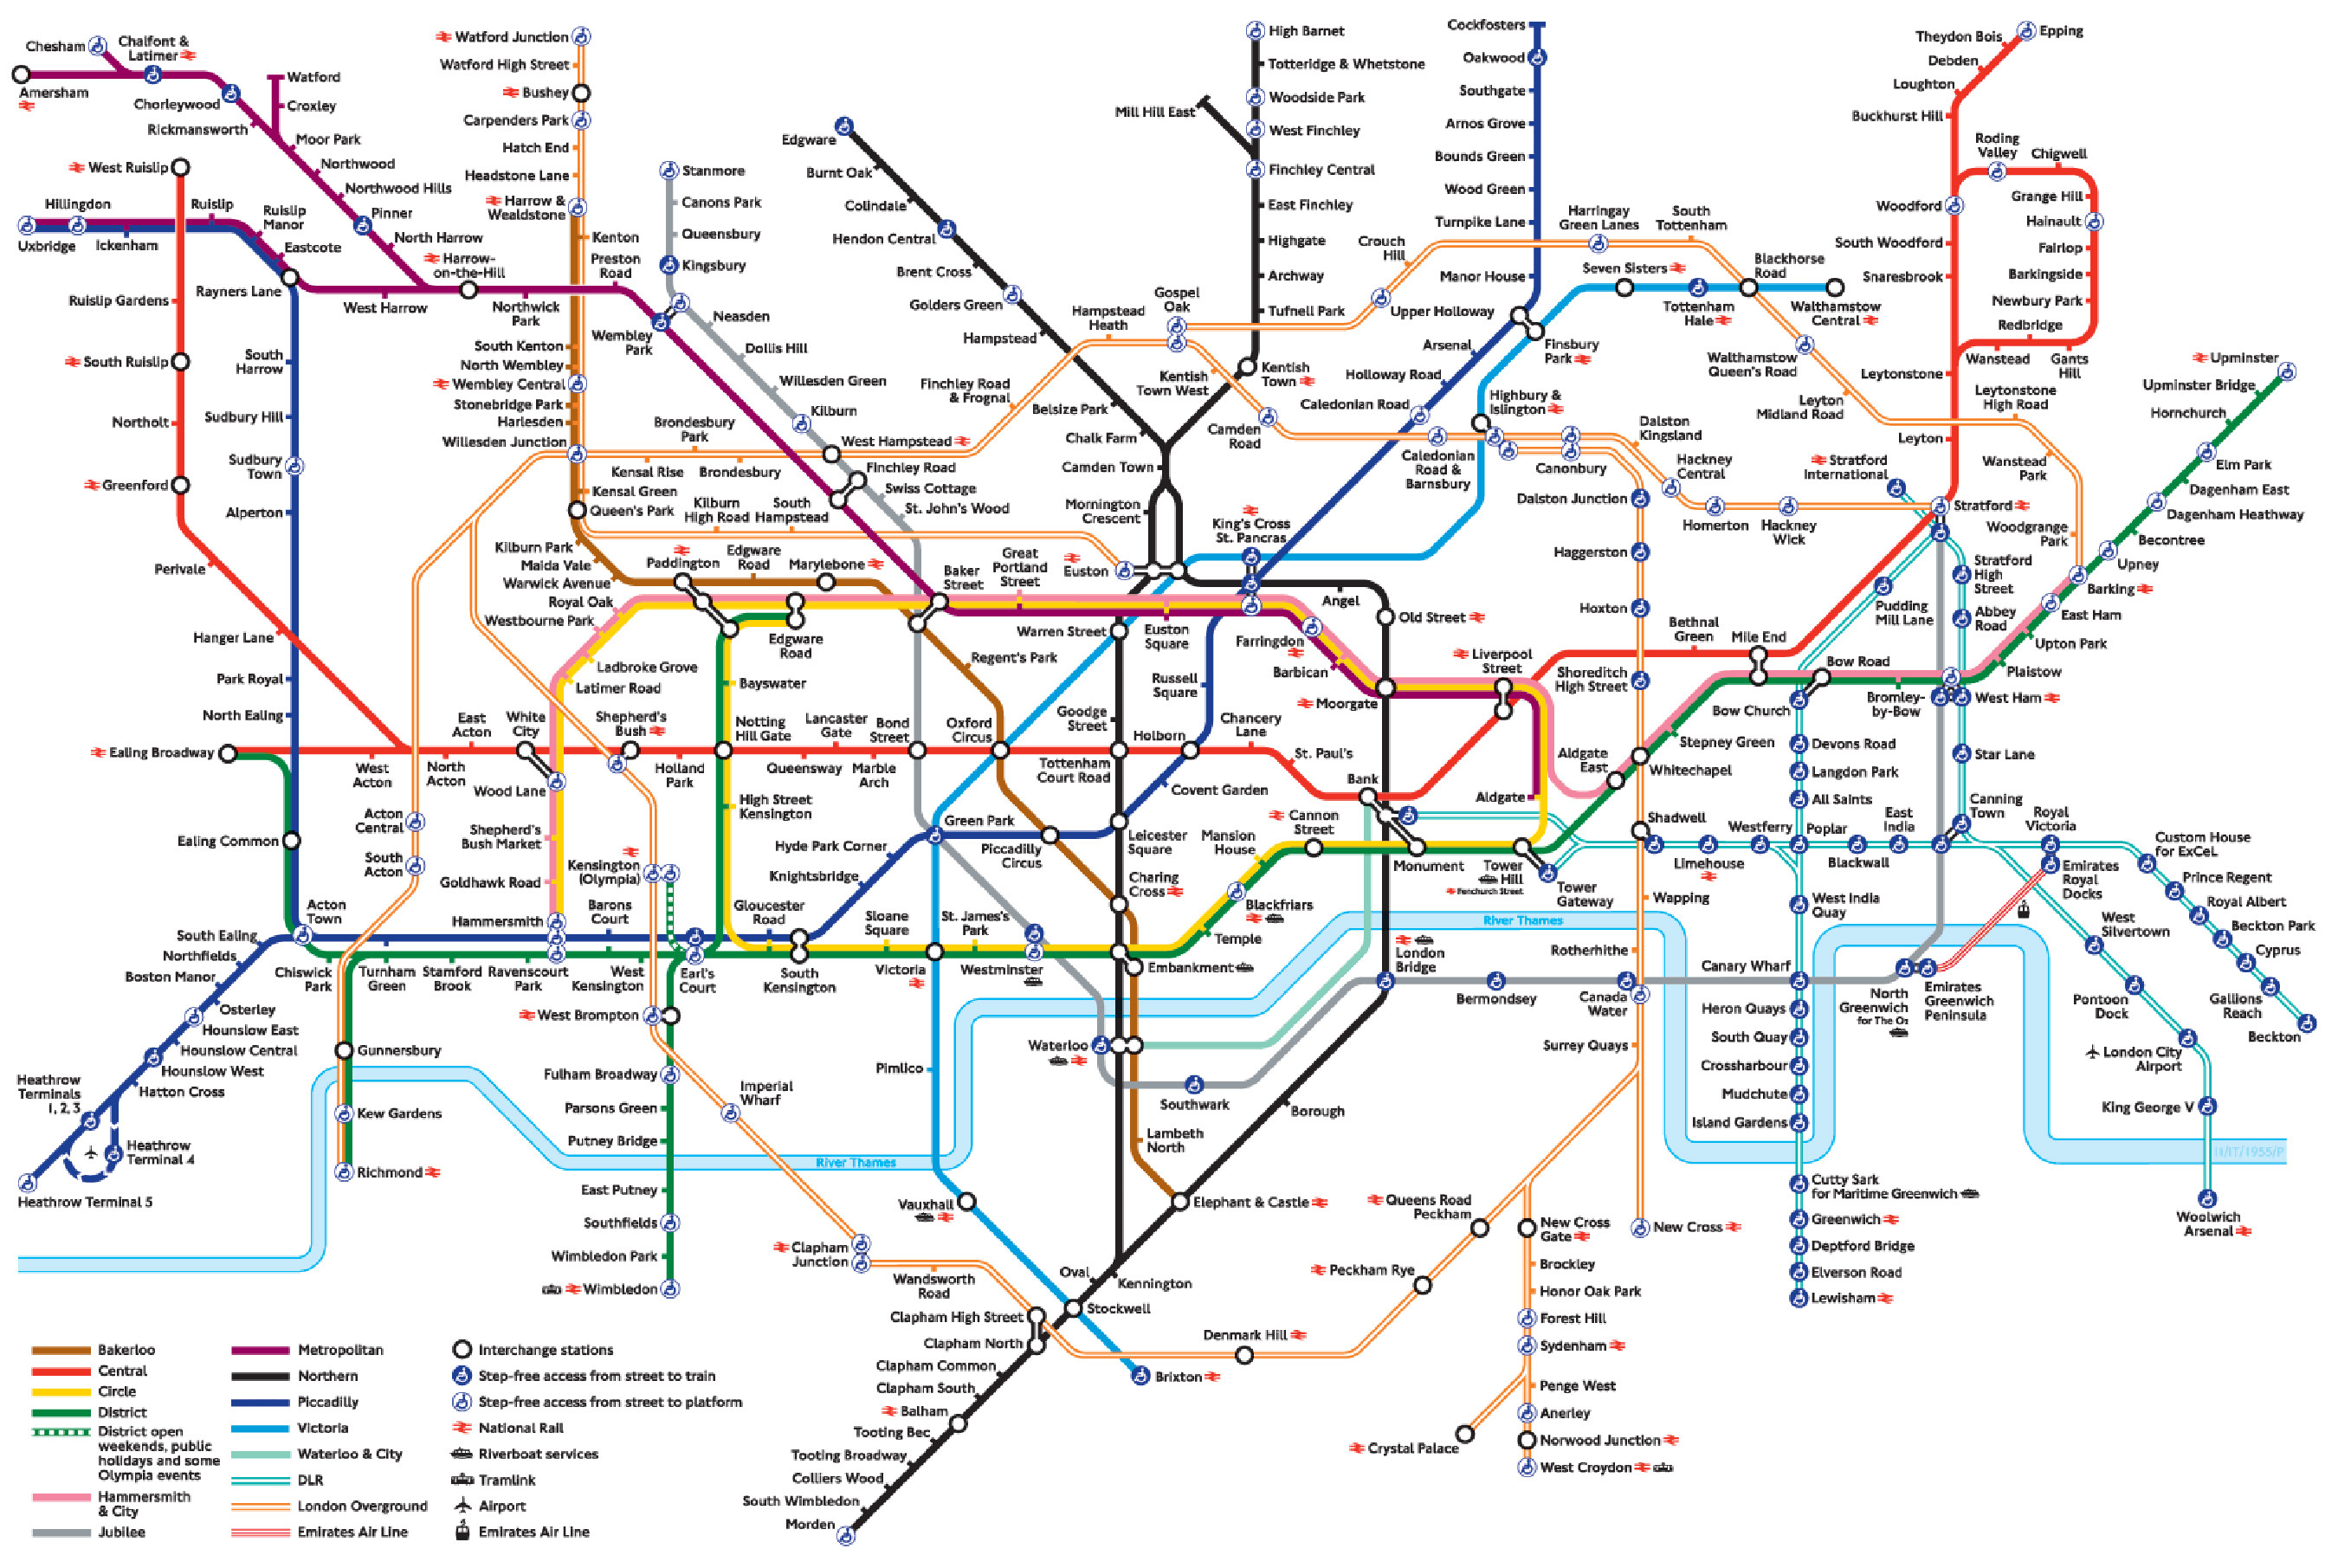 London Tube Map and Zones 2015 | Chameleon Web Services